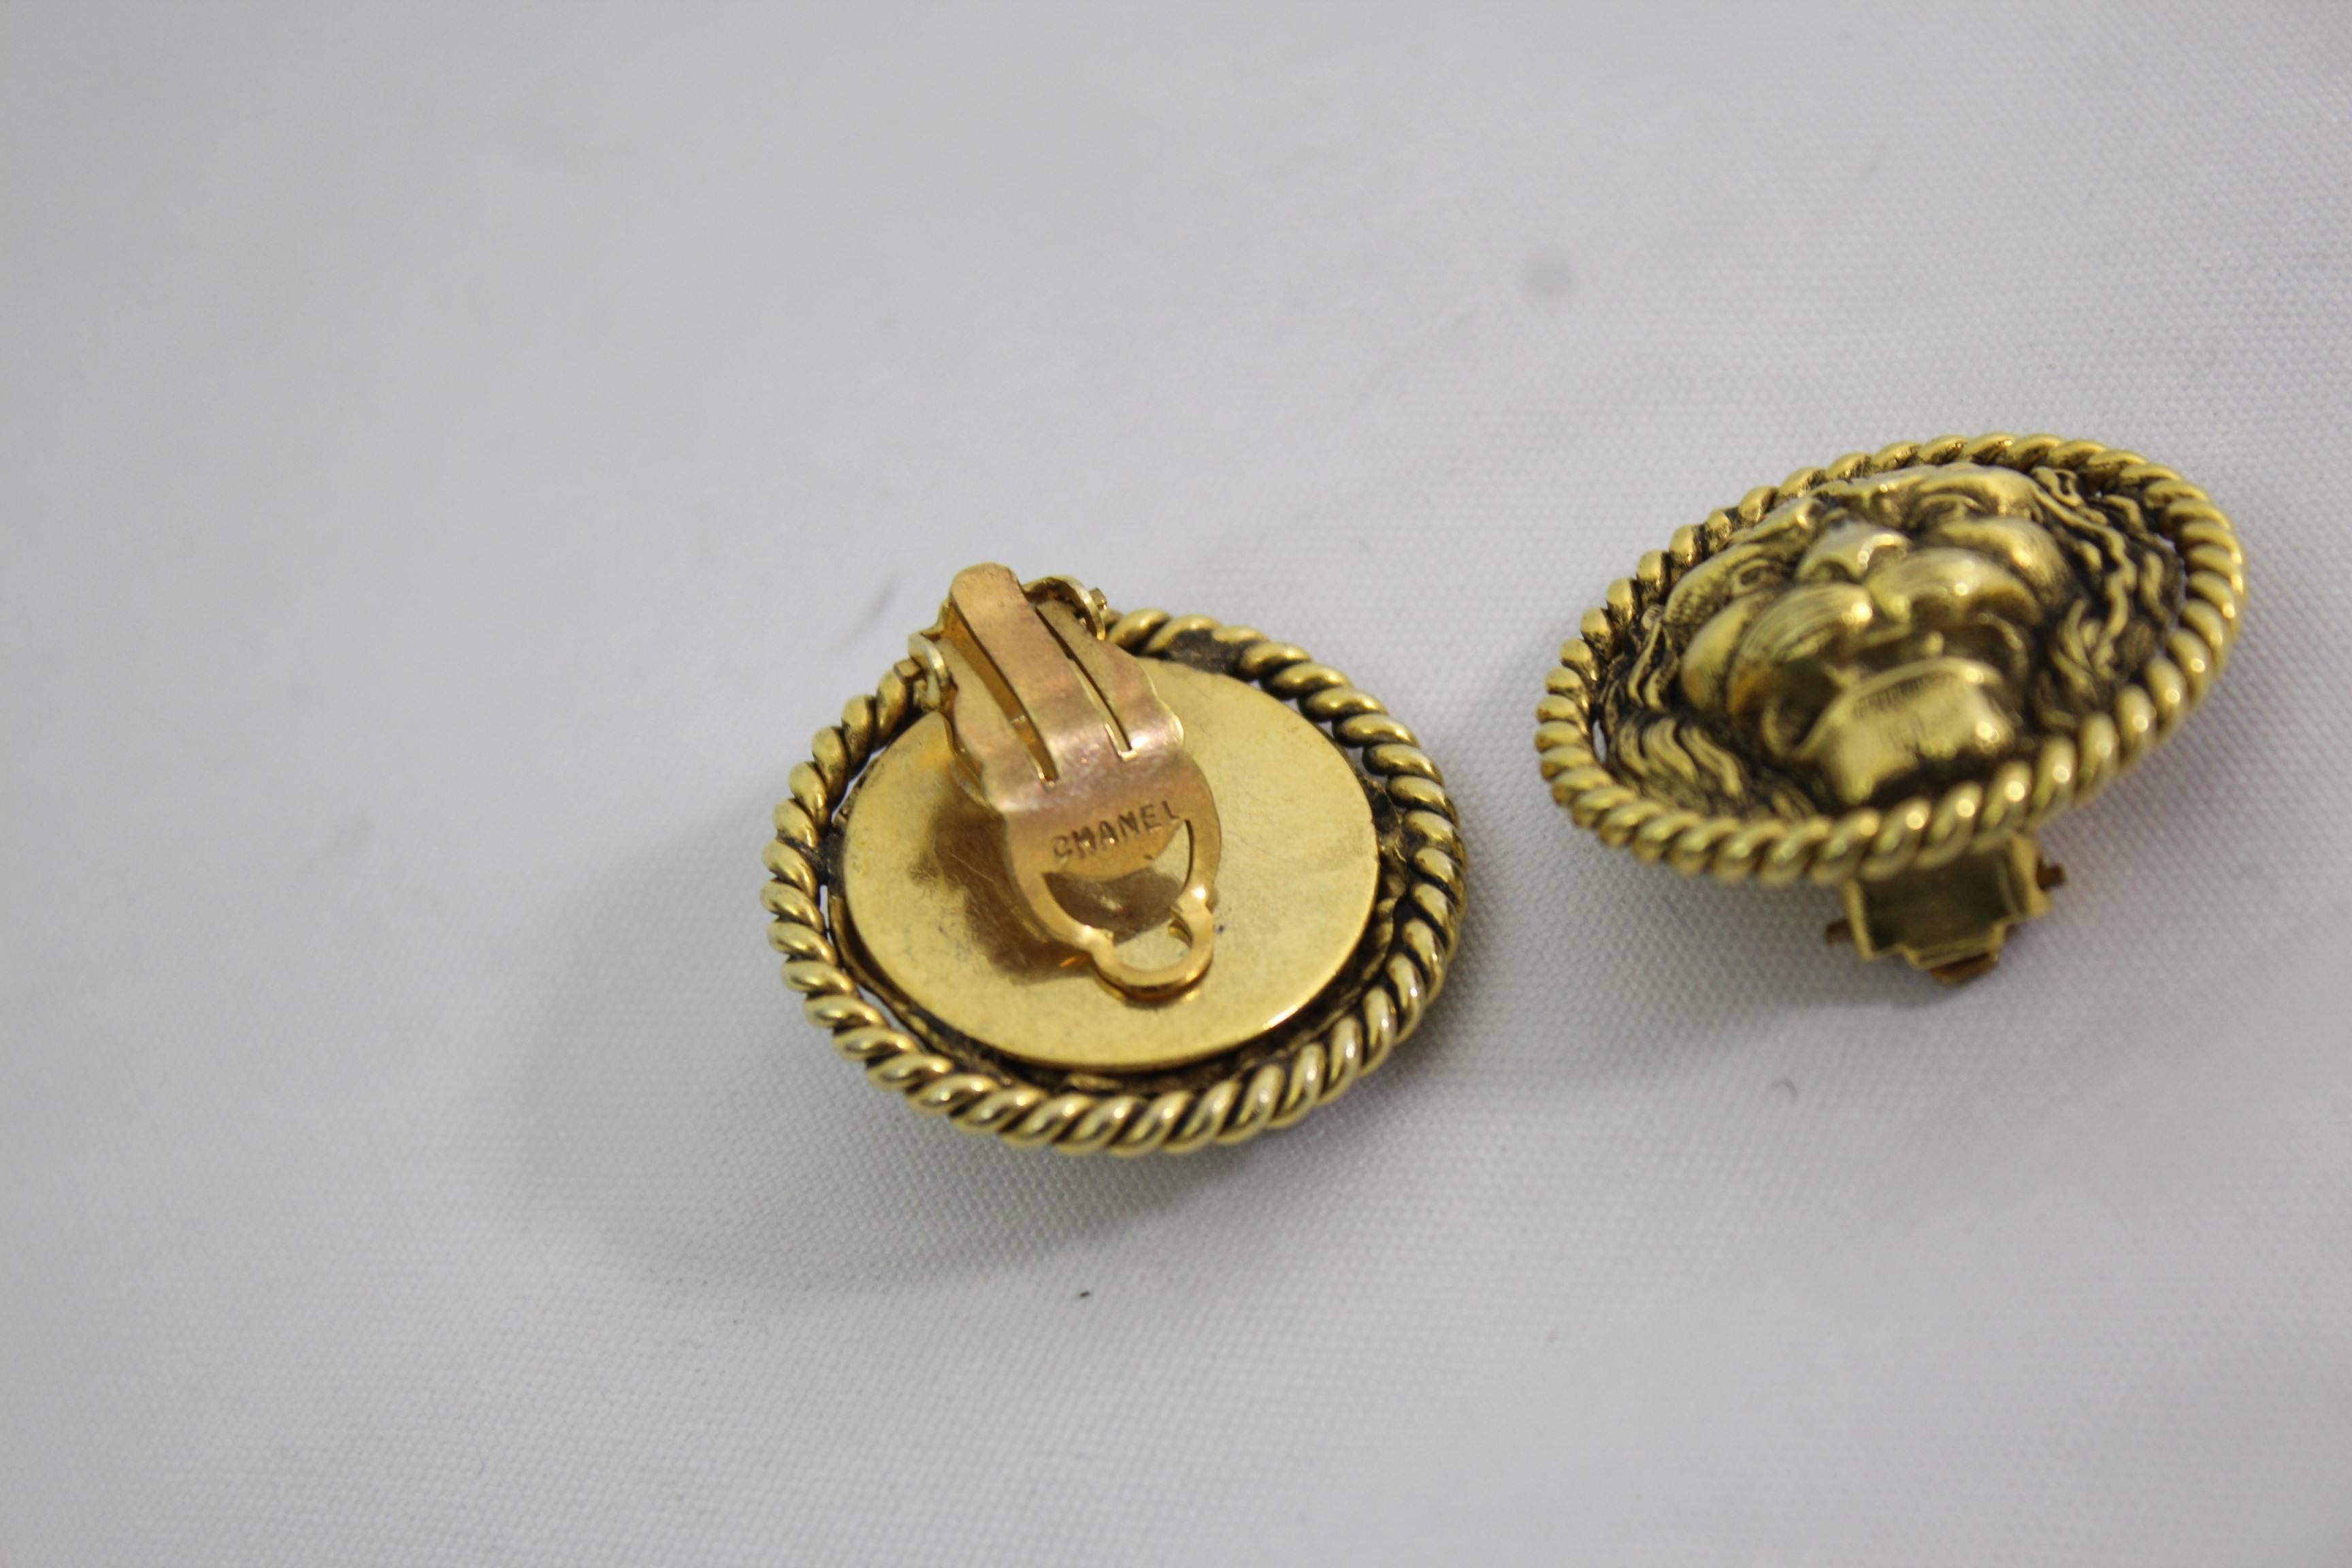 Awesome pair of Chanel Earrings in gold plated metal.

Clip system

Signed in the back

